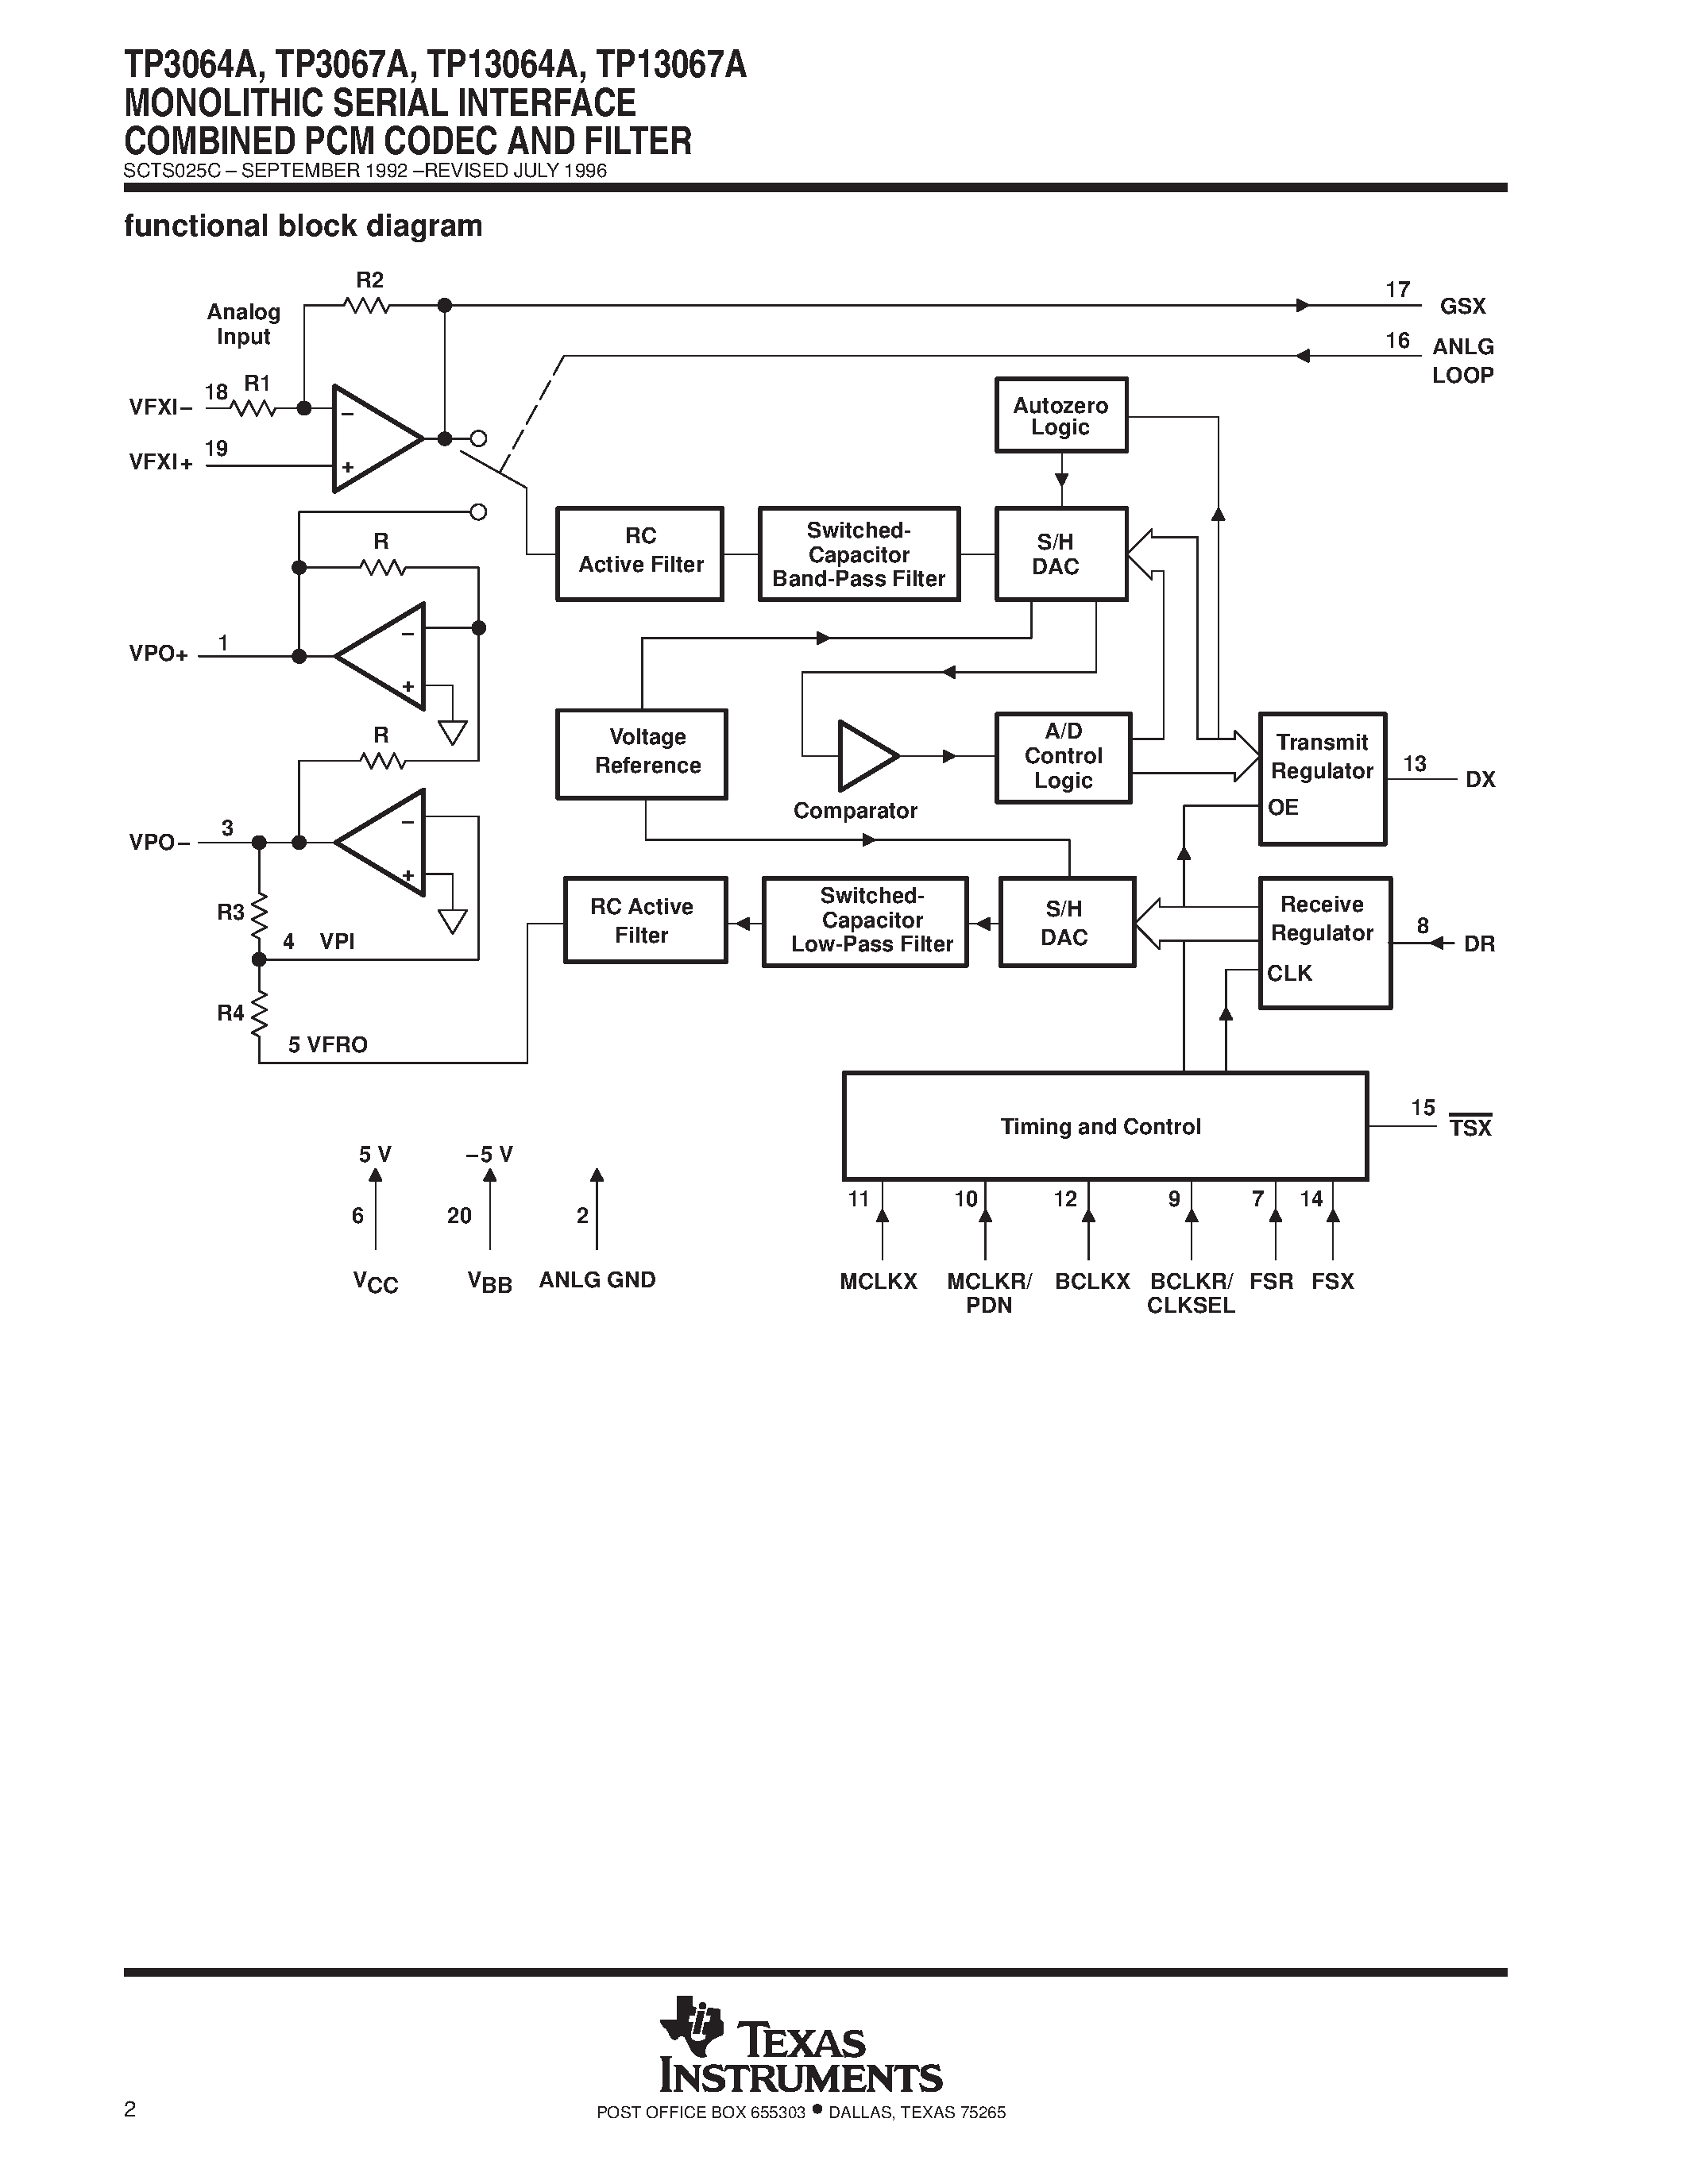 Datasheet TP13067ADW - MONOLITHIC SERIAL INTERFACE COMBINED PCM CODEC AND FILTER page 2